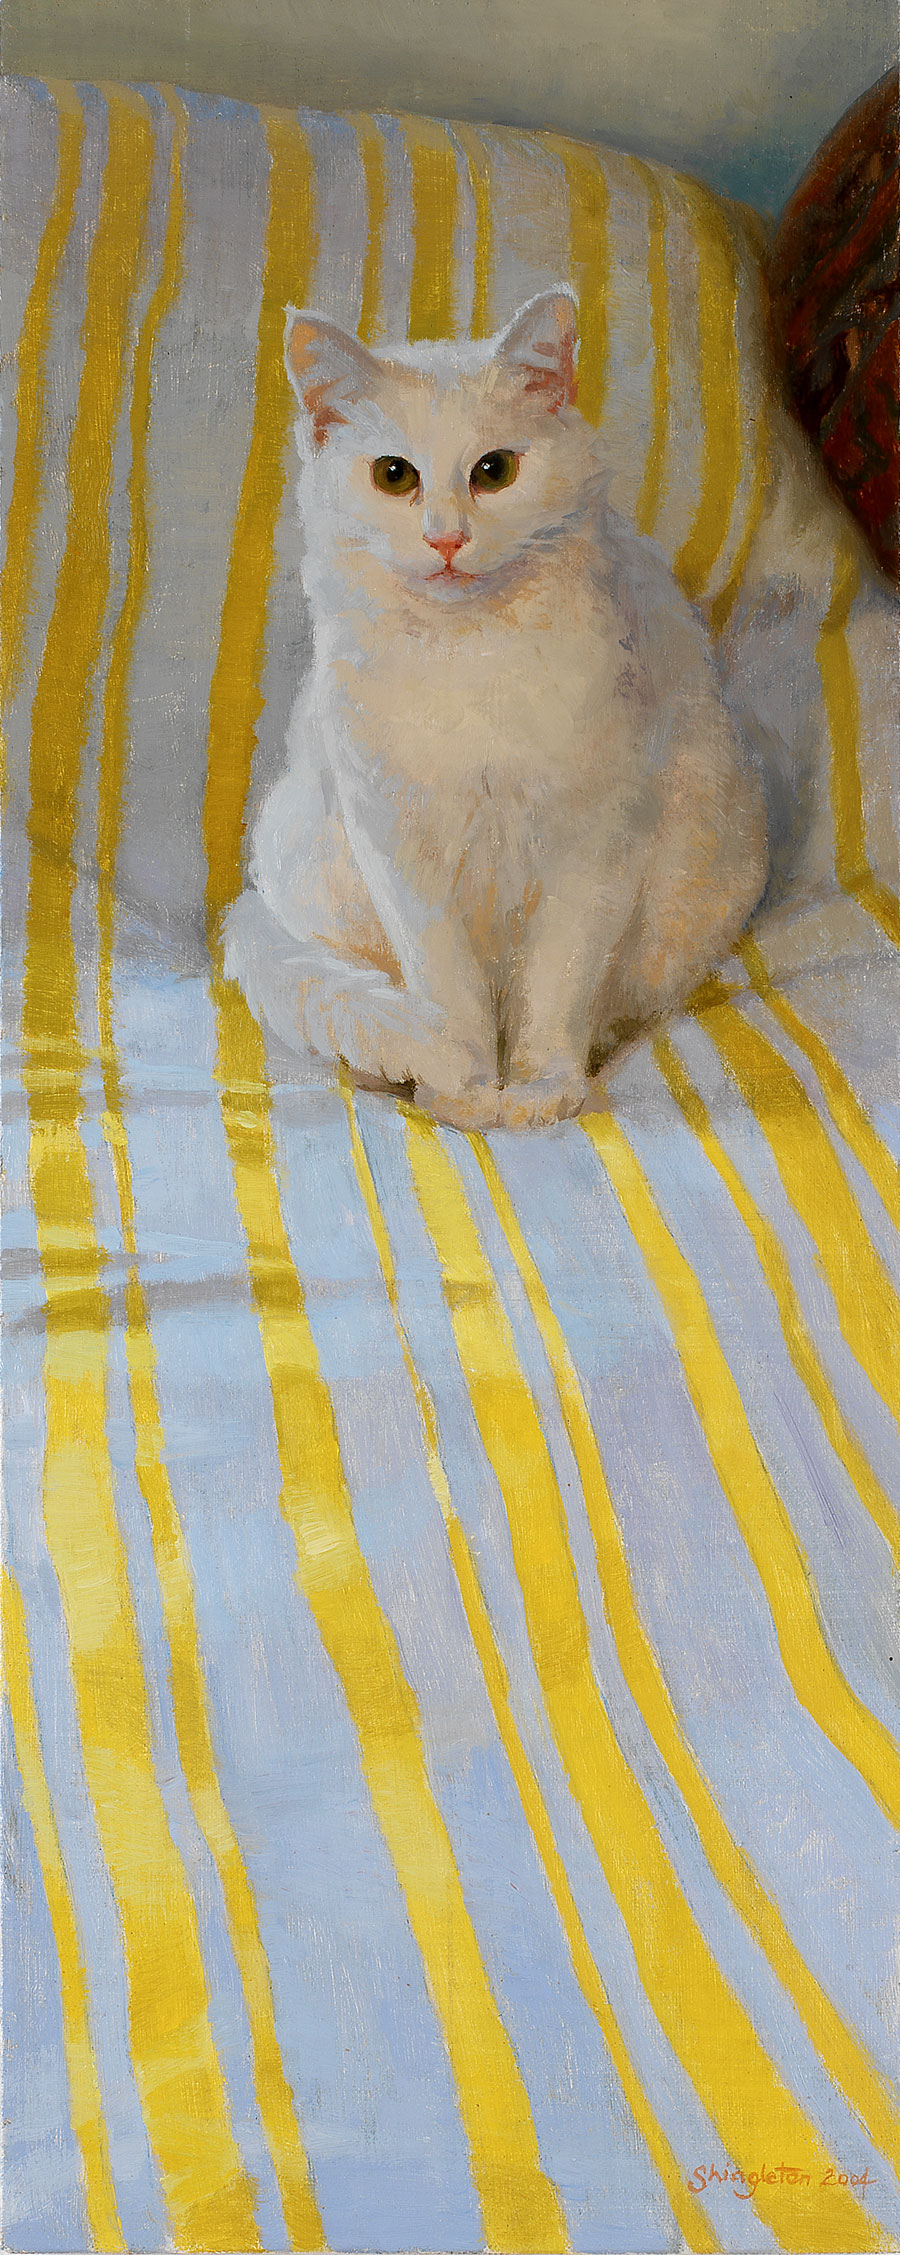 White cat and yellow stripes